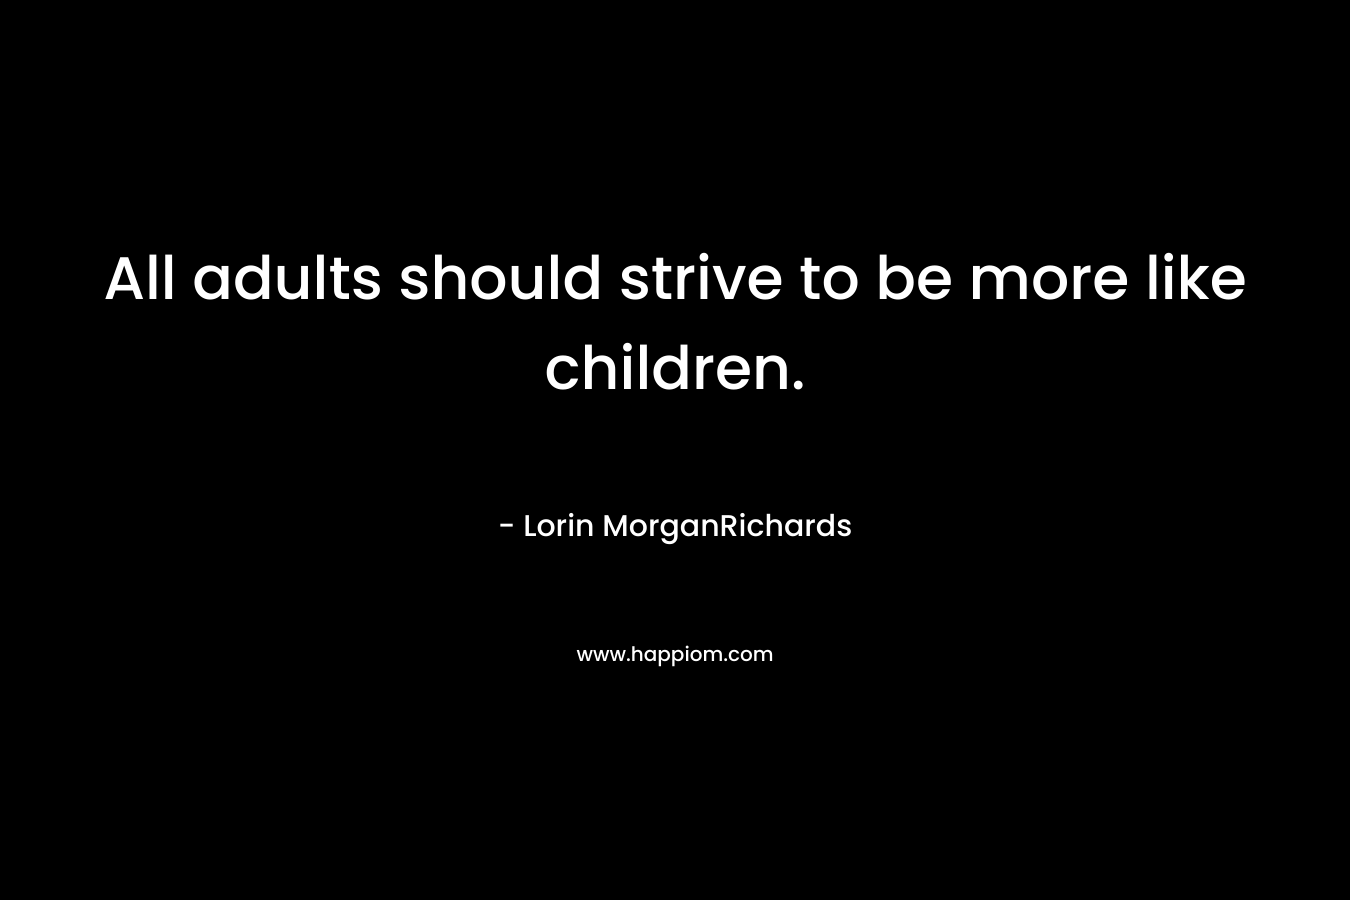 All adults should strive to be more like children. – Lorin MorganRichards